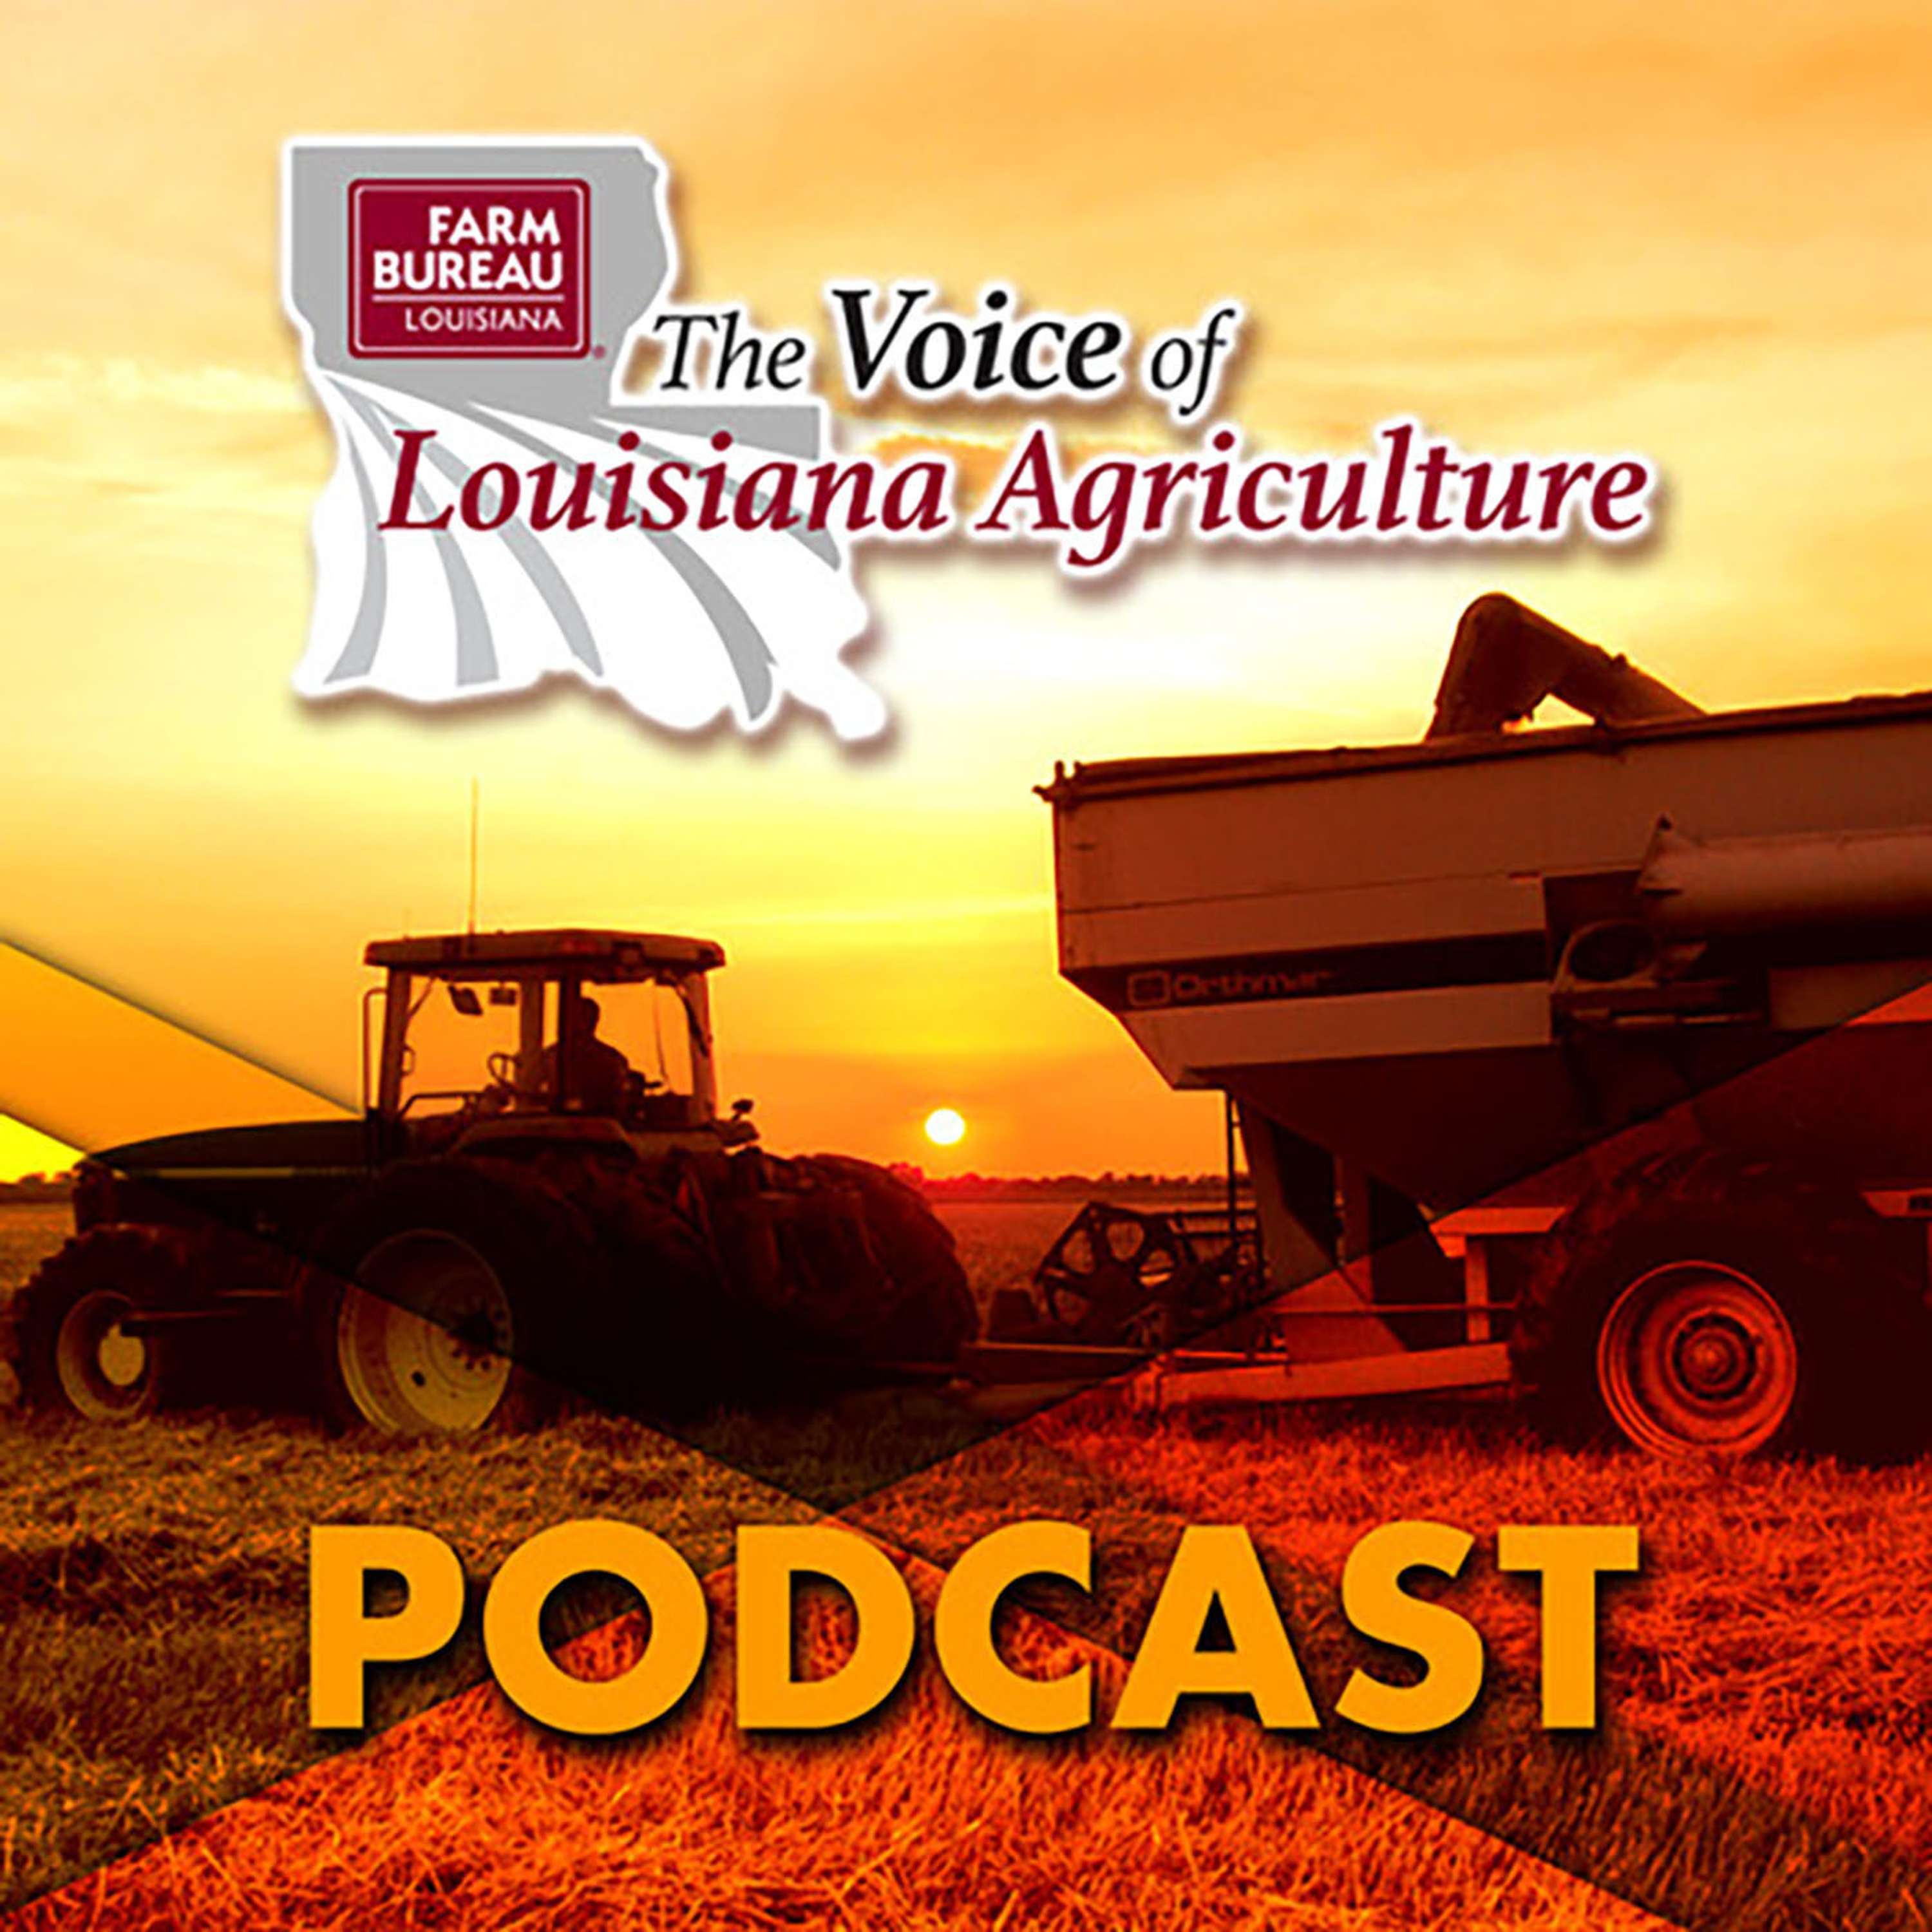 The Voice of Louisiana Agriculture Podcast #16 - August 24, 2018